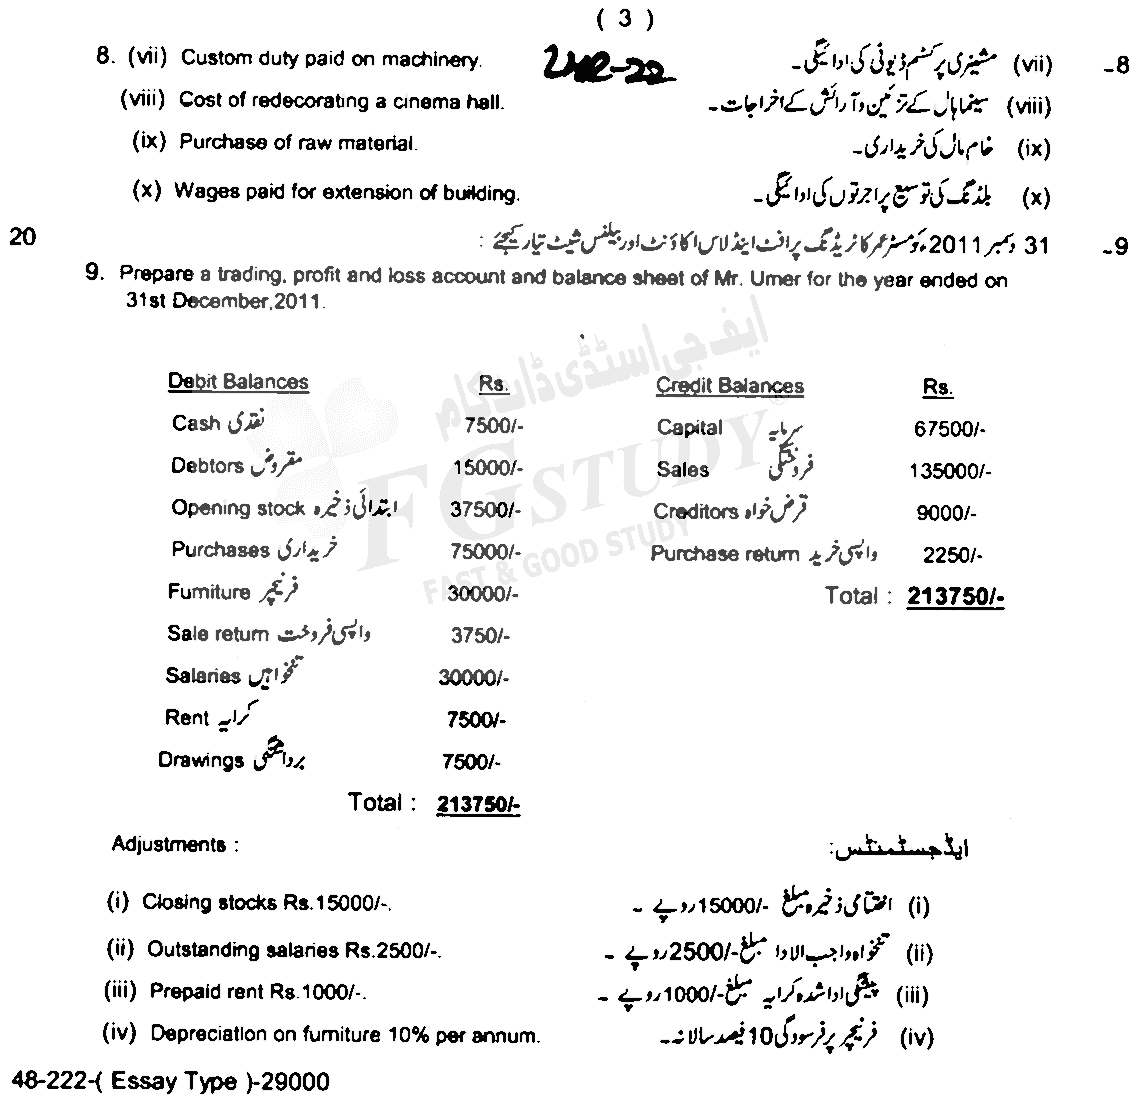 11th Class Principles Of Accounting Past Paper 2022 Lahore Board Subjective